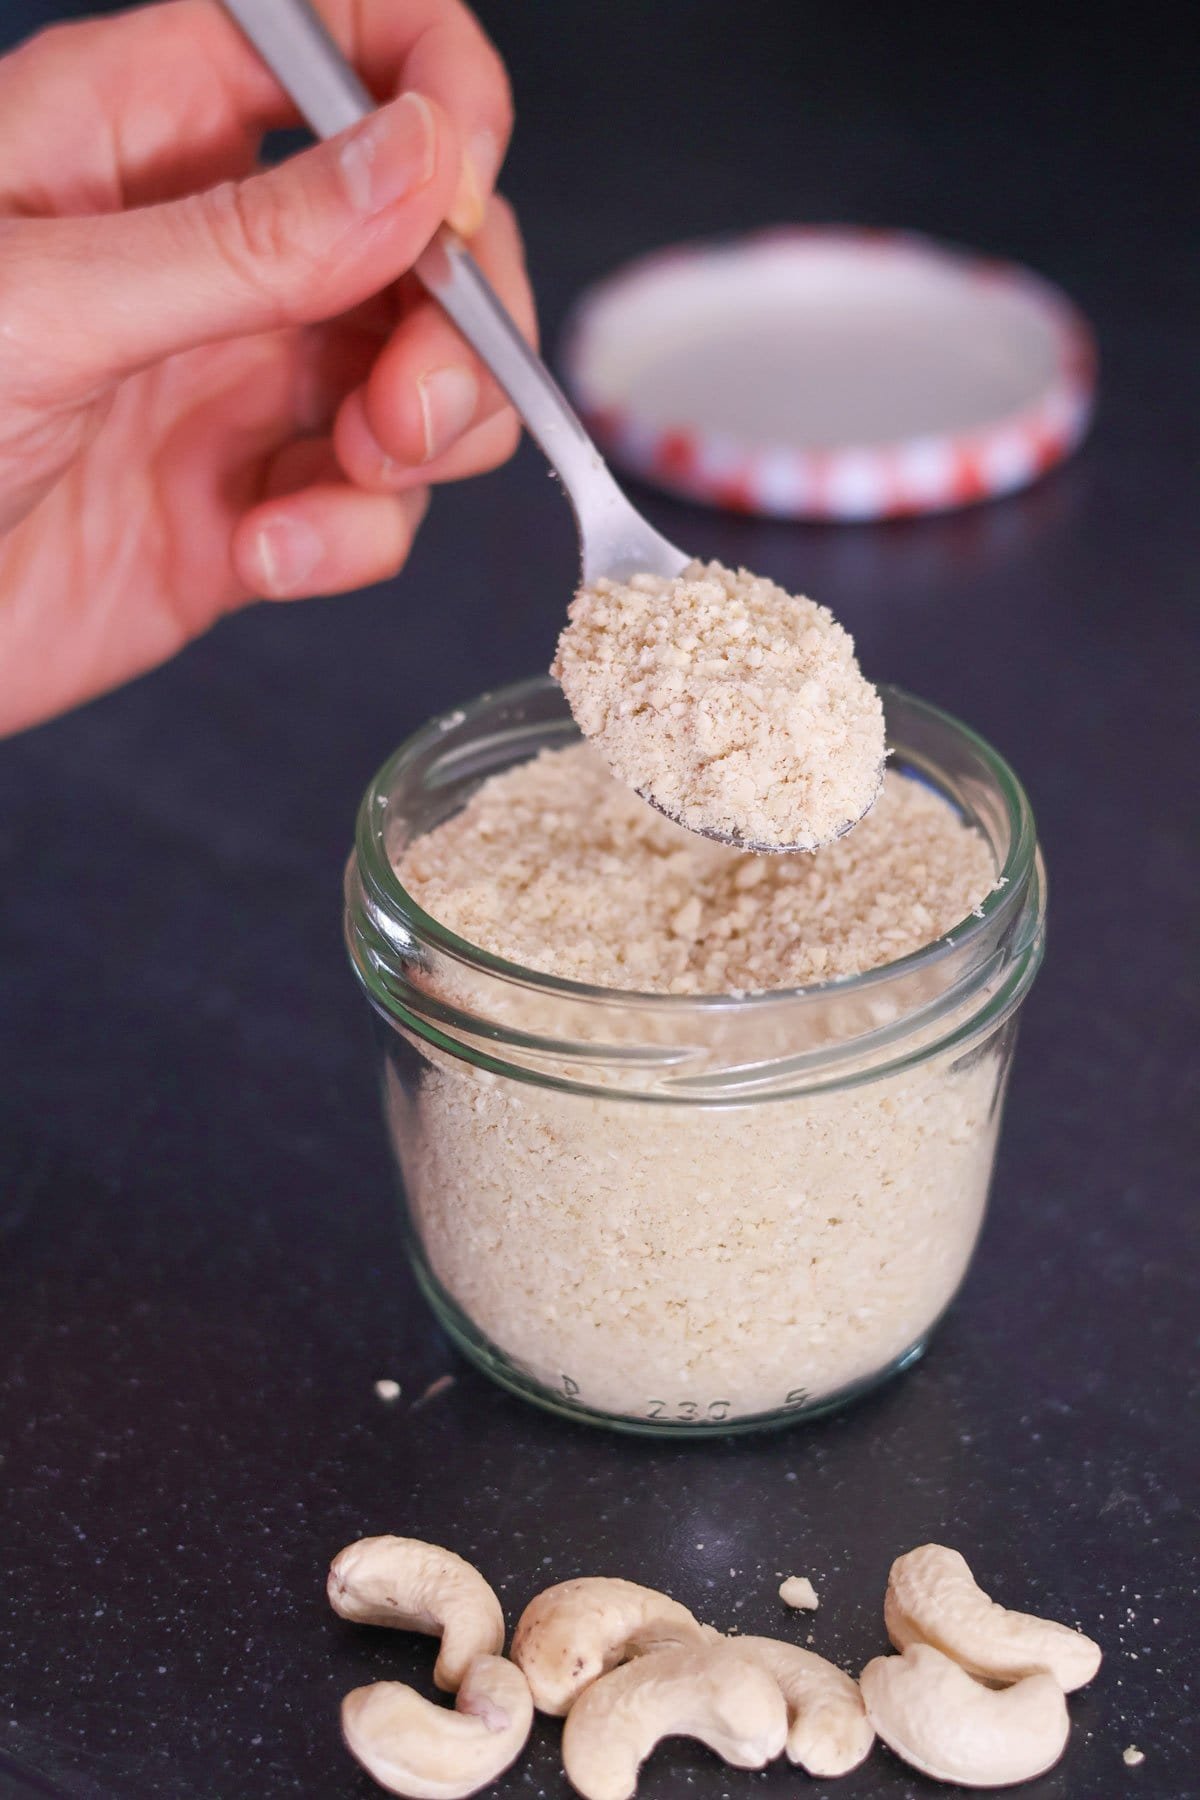 A hand holds a silver spoon with vegan parmesan cheese above a jar with more vegan parmesan cheese.